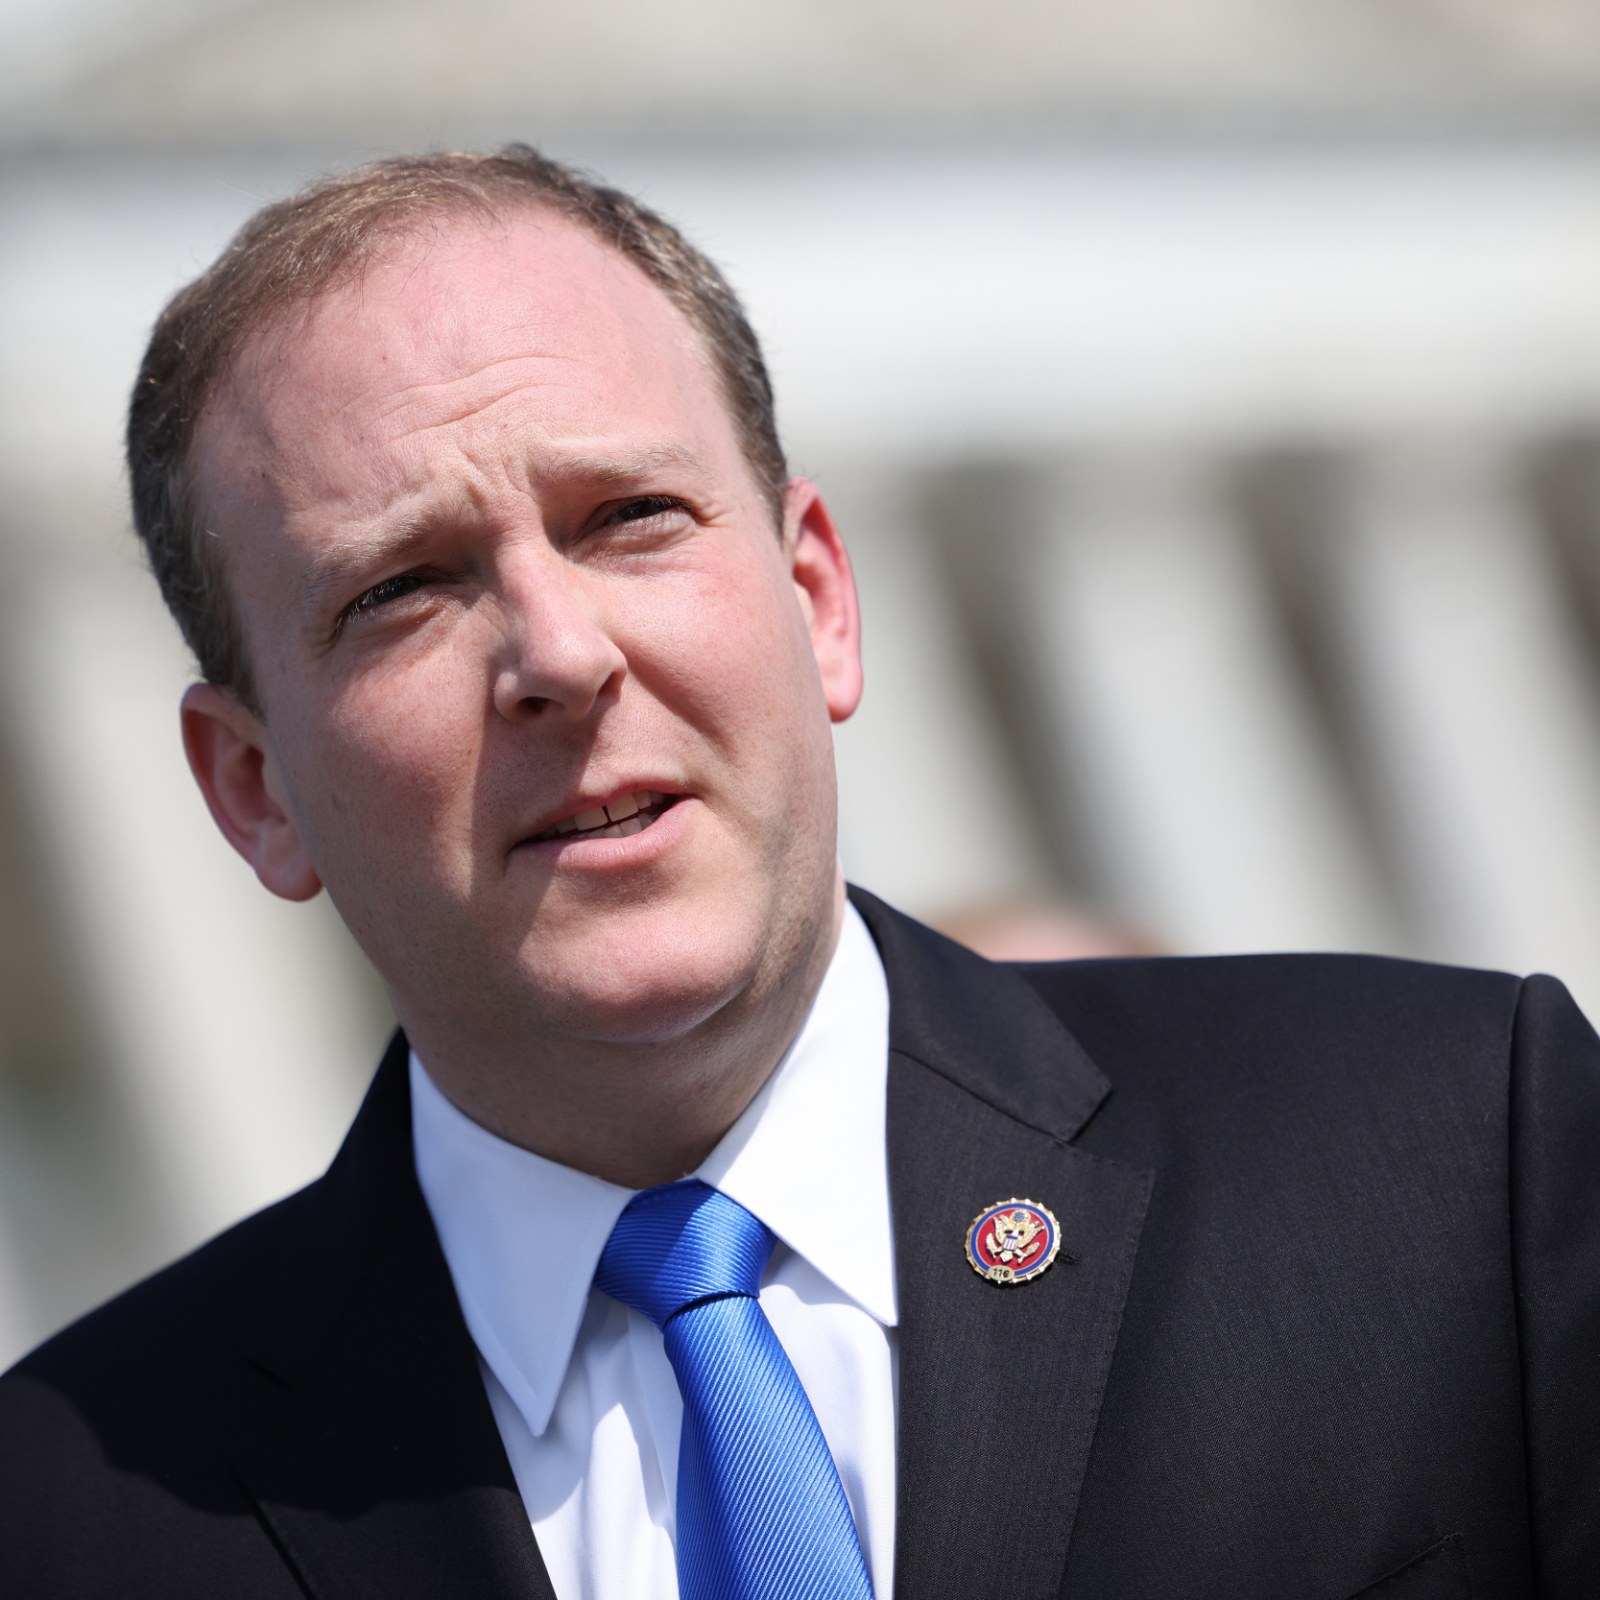 Lee Zeldin Attack Video Shows Moment He Was Nearly Stabbed: 'You're Done'